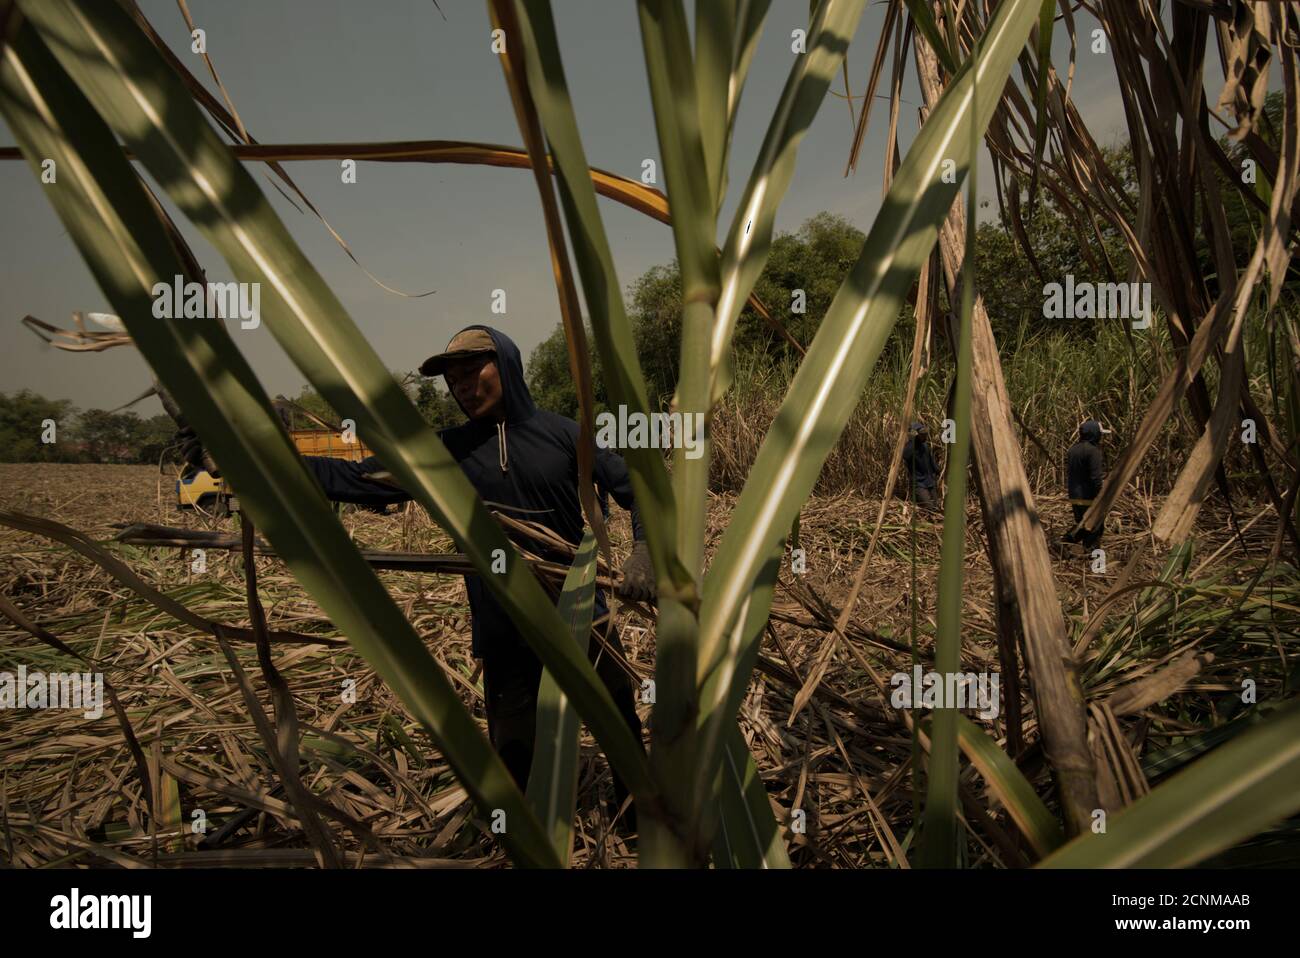 Workers harvesting sugarcane on an agricultural land leased and managed by Tasikmadu Sugar Mill in Karanganyar regency, Central Java, Indonesia. Stock Photo